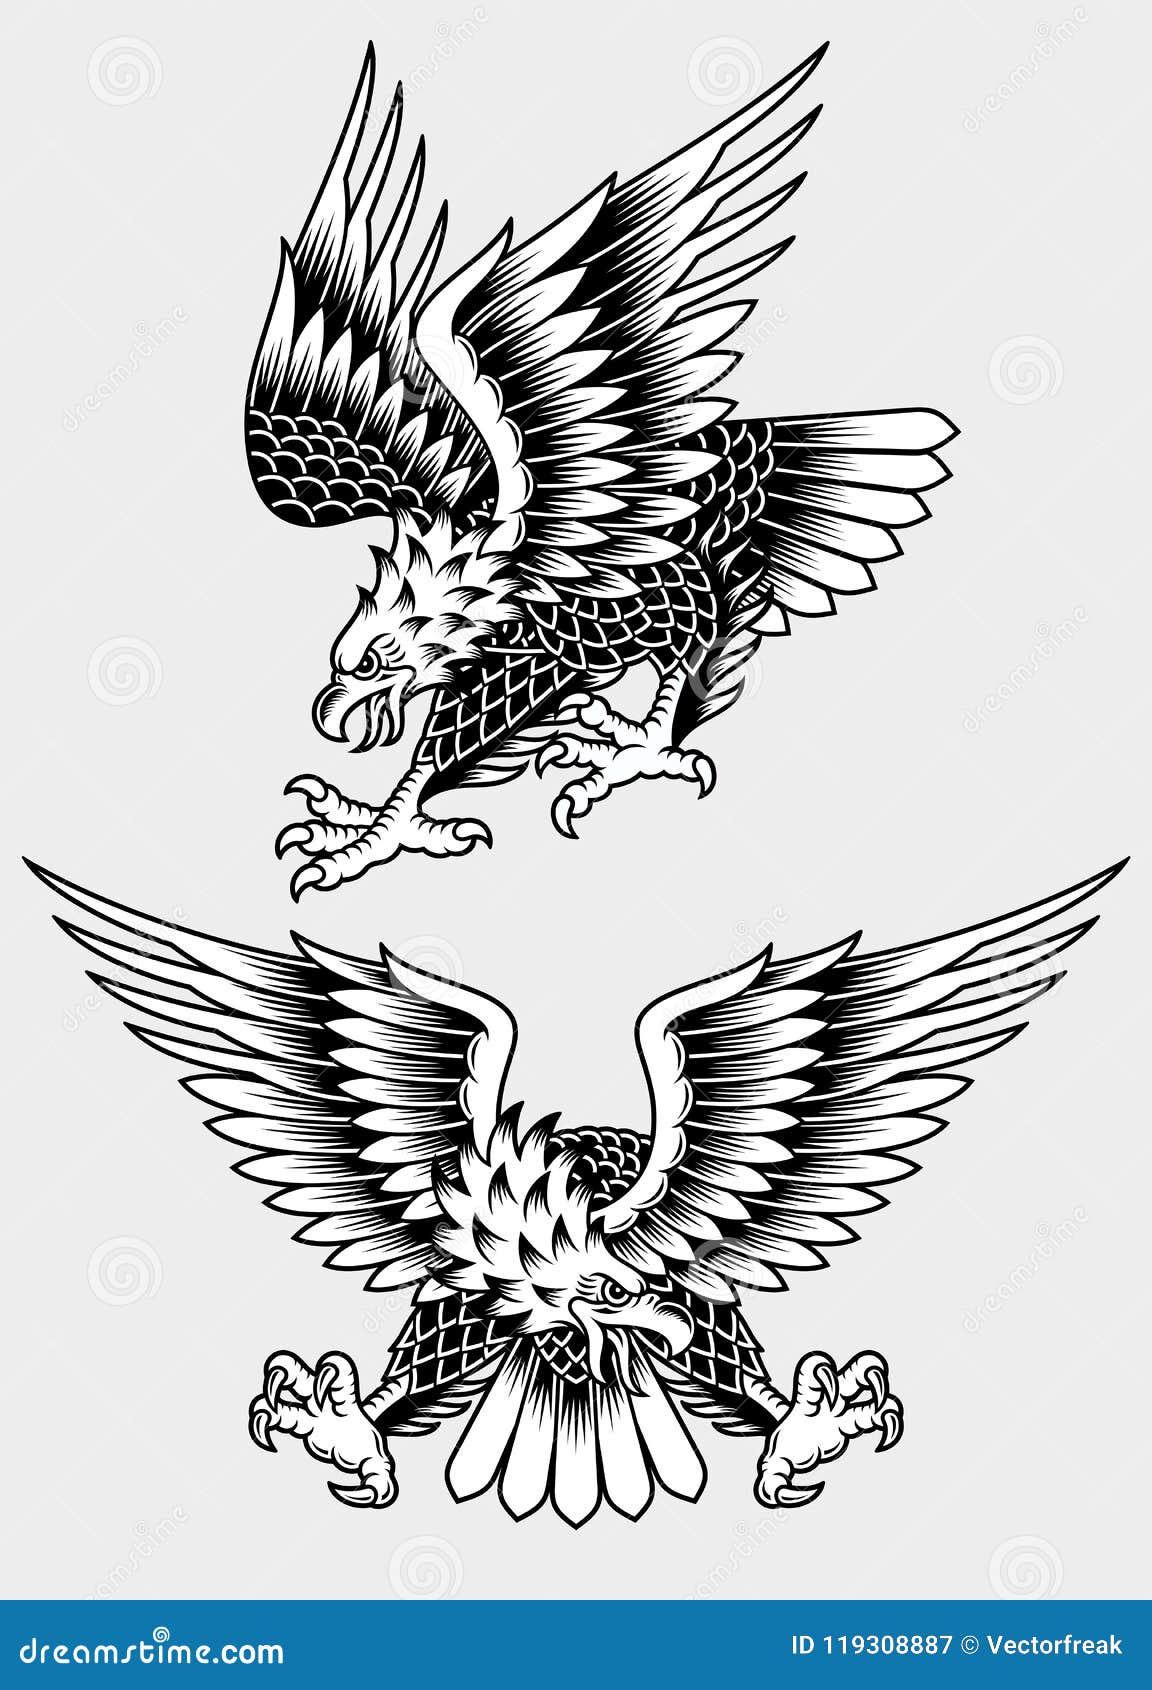 100 Best Eagle Tattoo Designs  Meanings  Spread Your Wings 2019